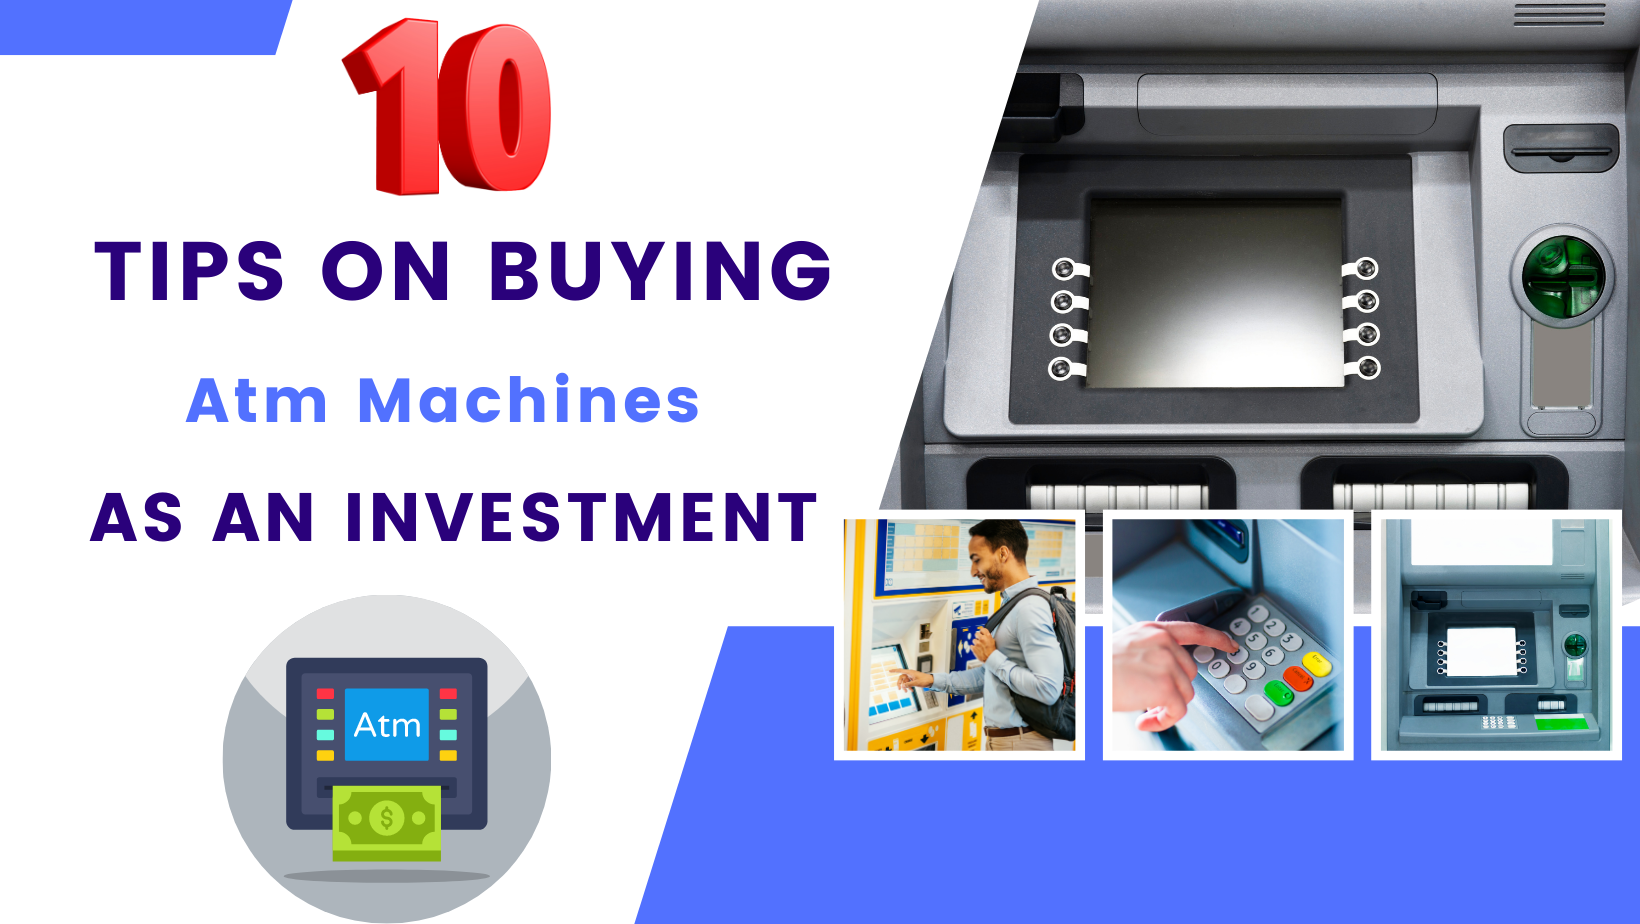 10 Tips on Buying Atm Machines as an Investment